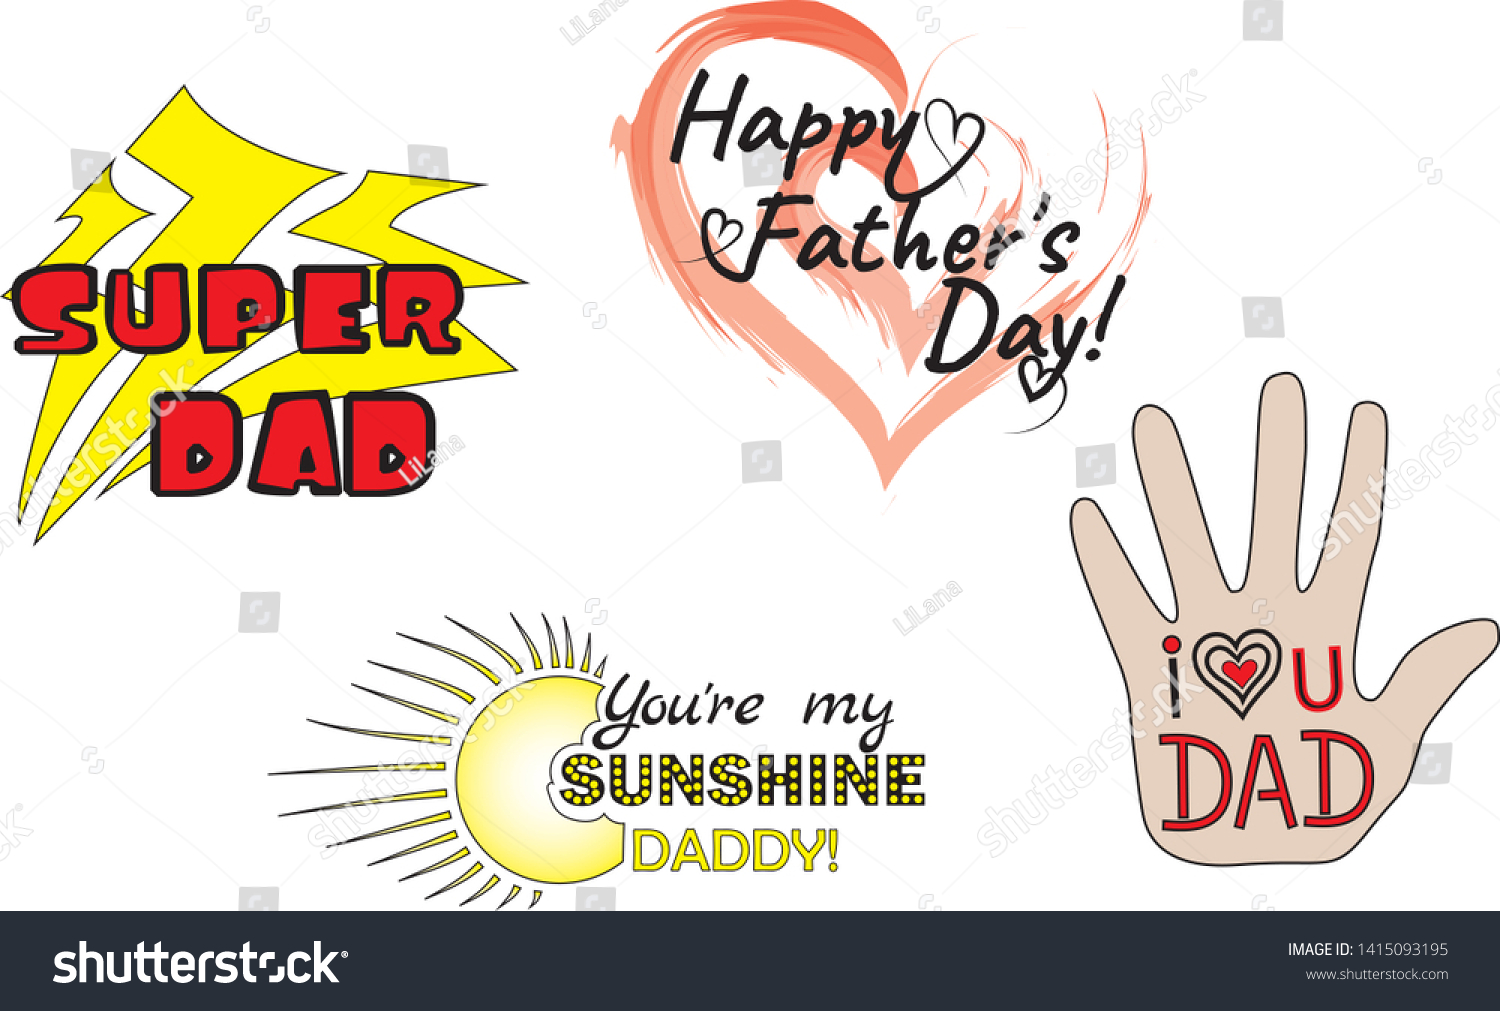 288 PCS Happy Father's Day Labels Stickers for Father's Day Party Supplies Favors,18 Sheets Self Adhesive Tags Stickers for Dad's Birthday Gift Decoration HOWAF Happy Fathers Day Stickers 